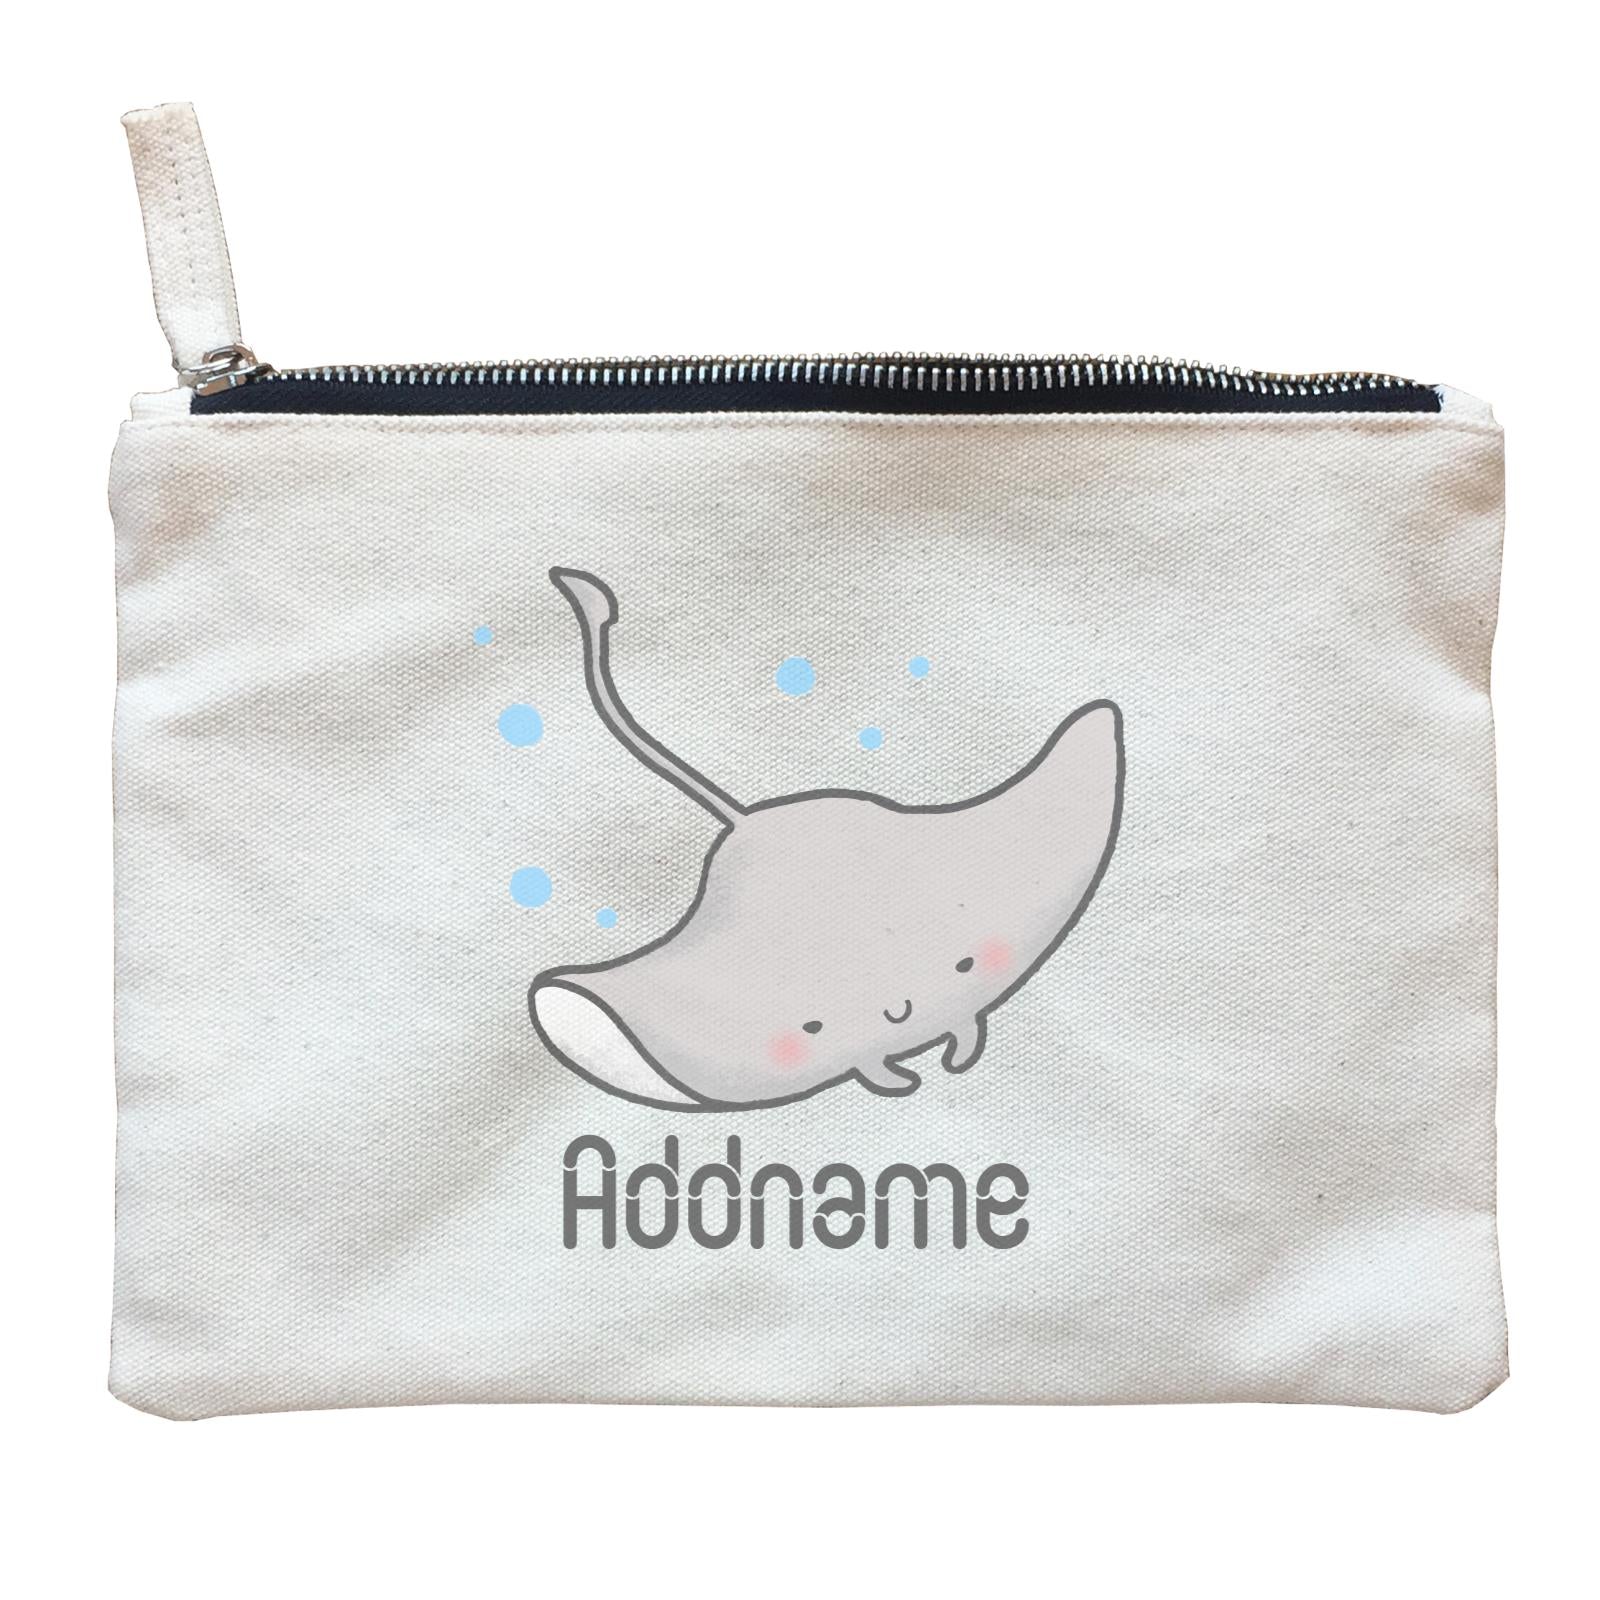 Cute Hand Drawn Style Stingray Addname Zipper Pouch